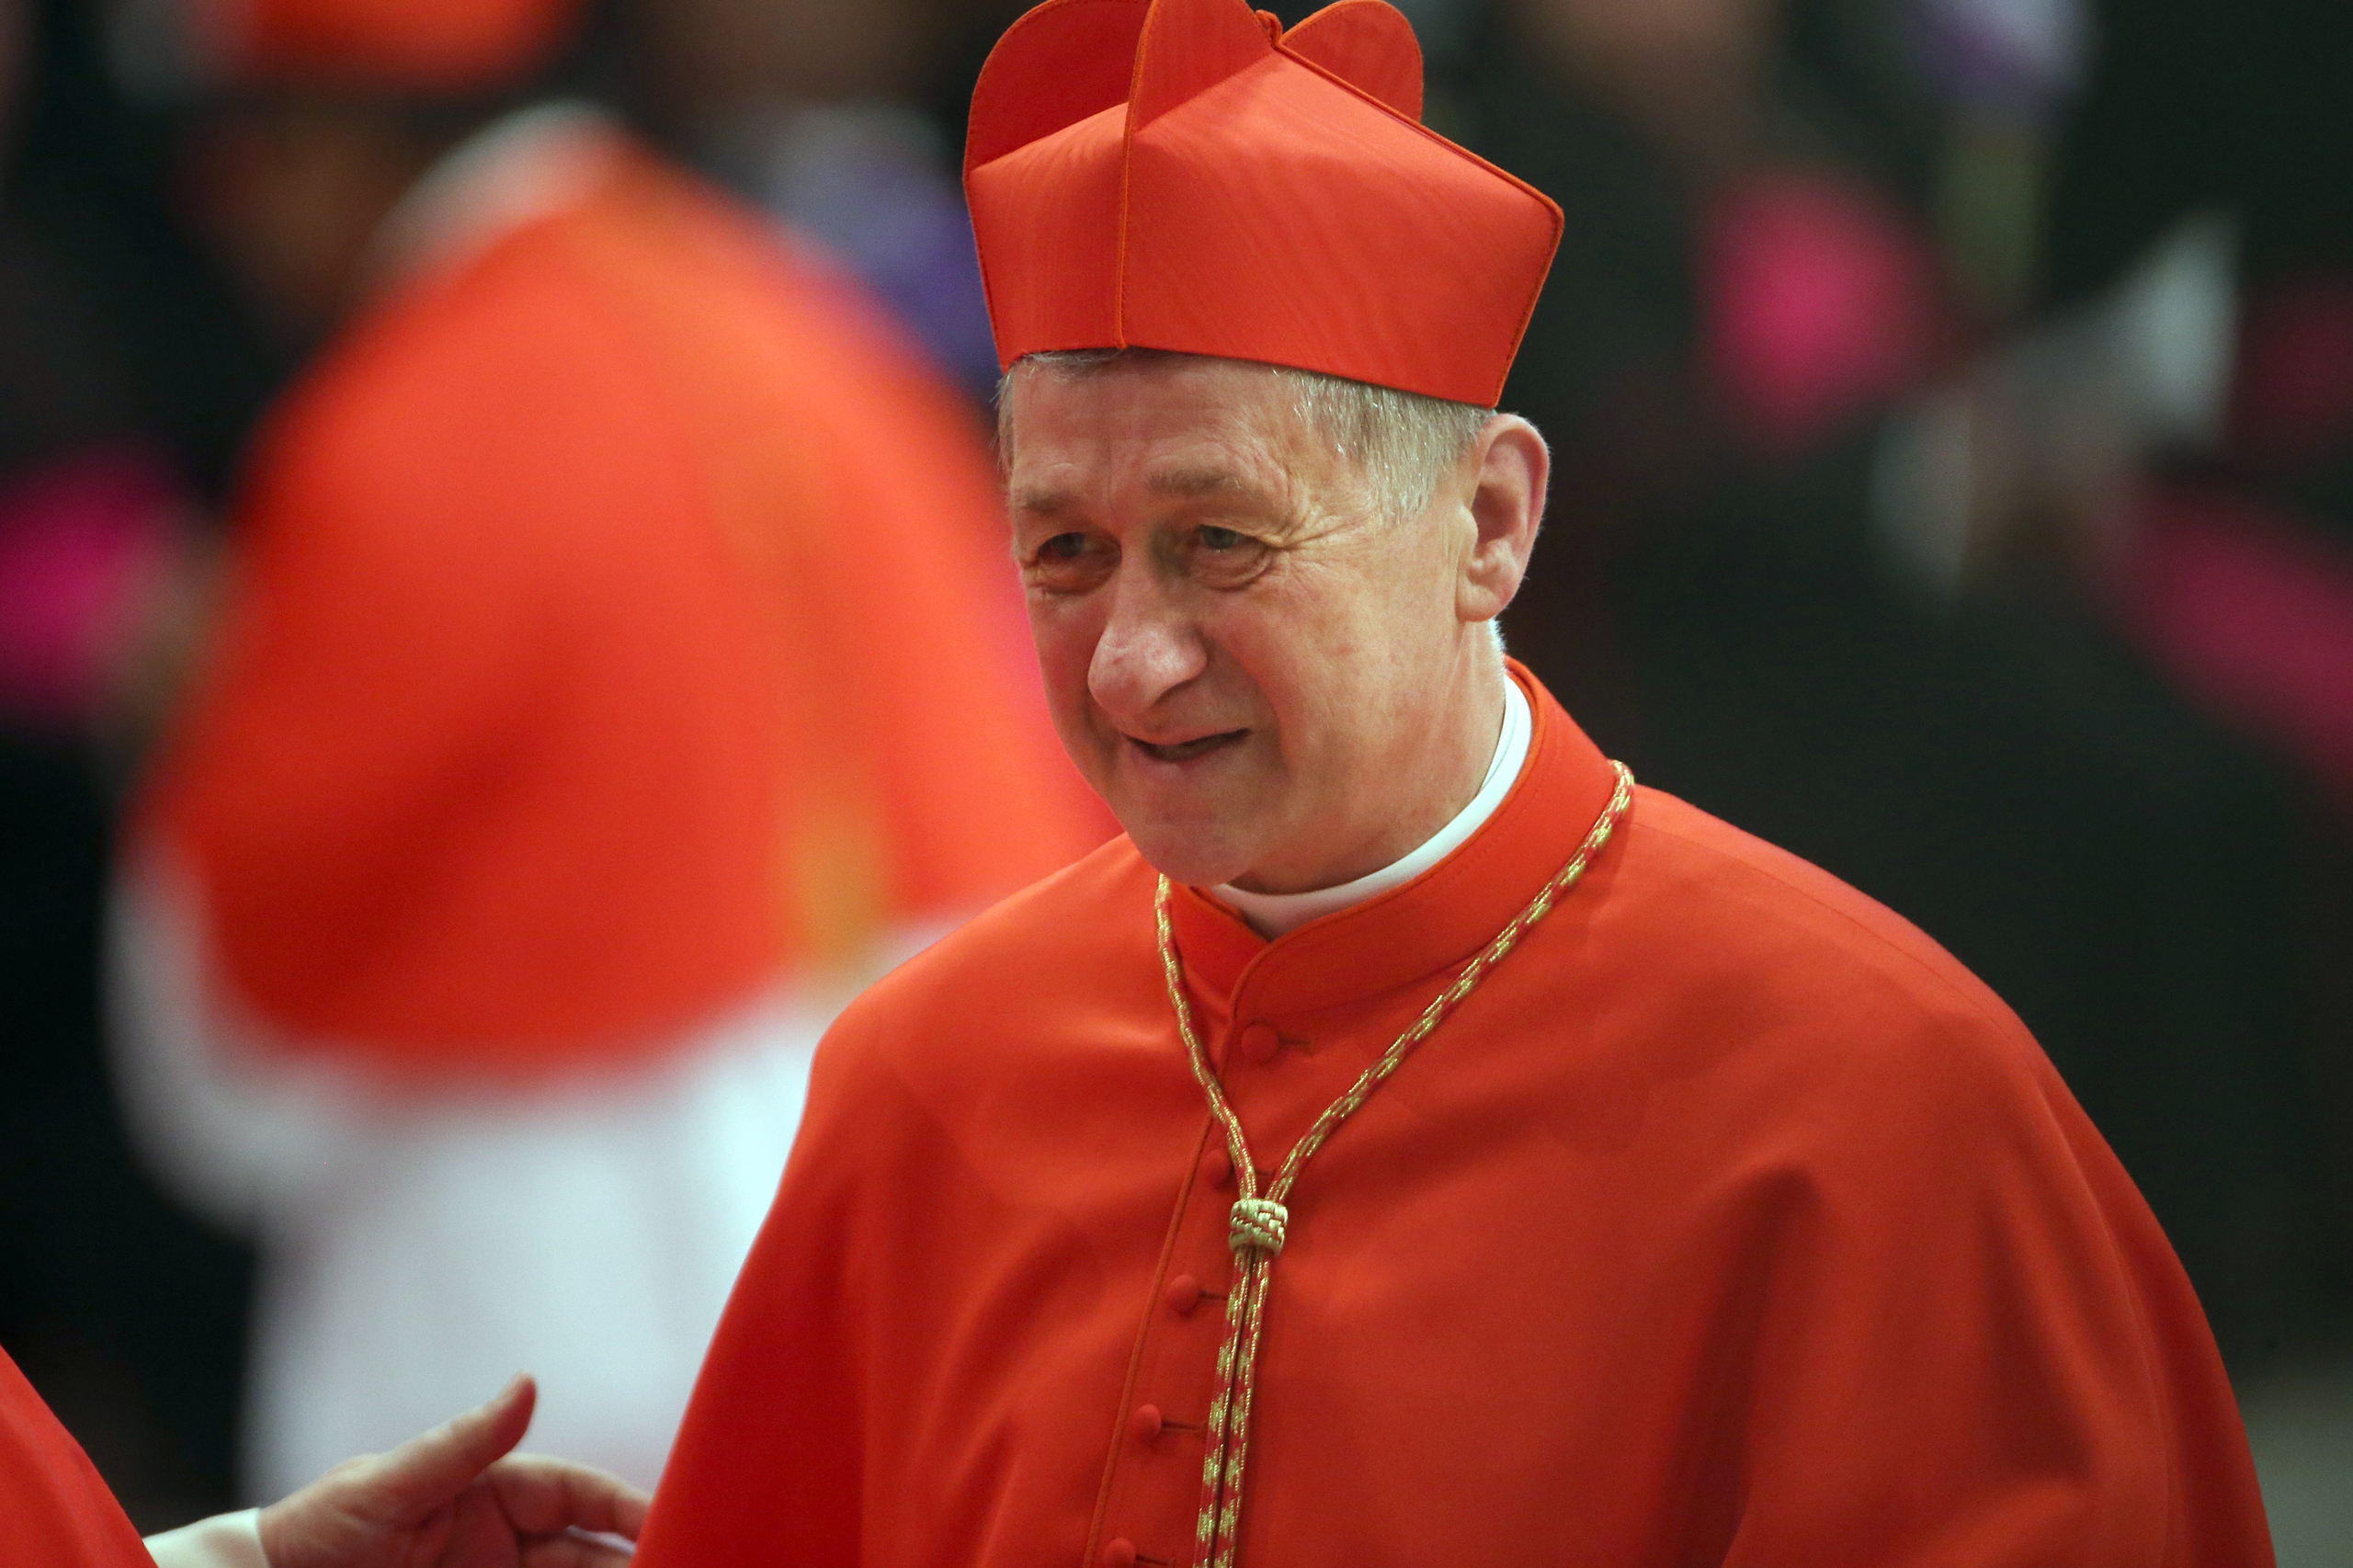 Archbishop of Chicago Blase J. Cupich receives congratulations from cardinals during the Ordinary Public Consistory celebrated by Pope Francis at St. Peter's Basilica in Vatican City on Nov. 19, 2016. (Franco Origlia—Getty Images)